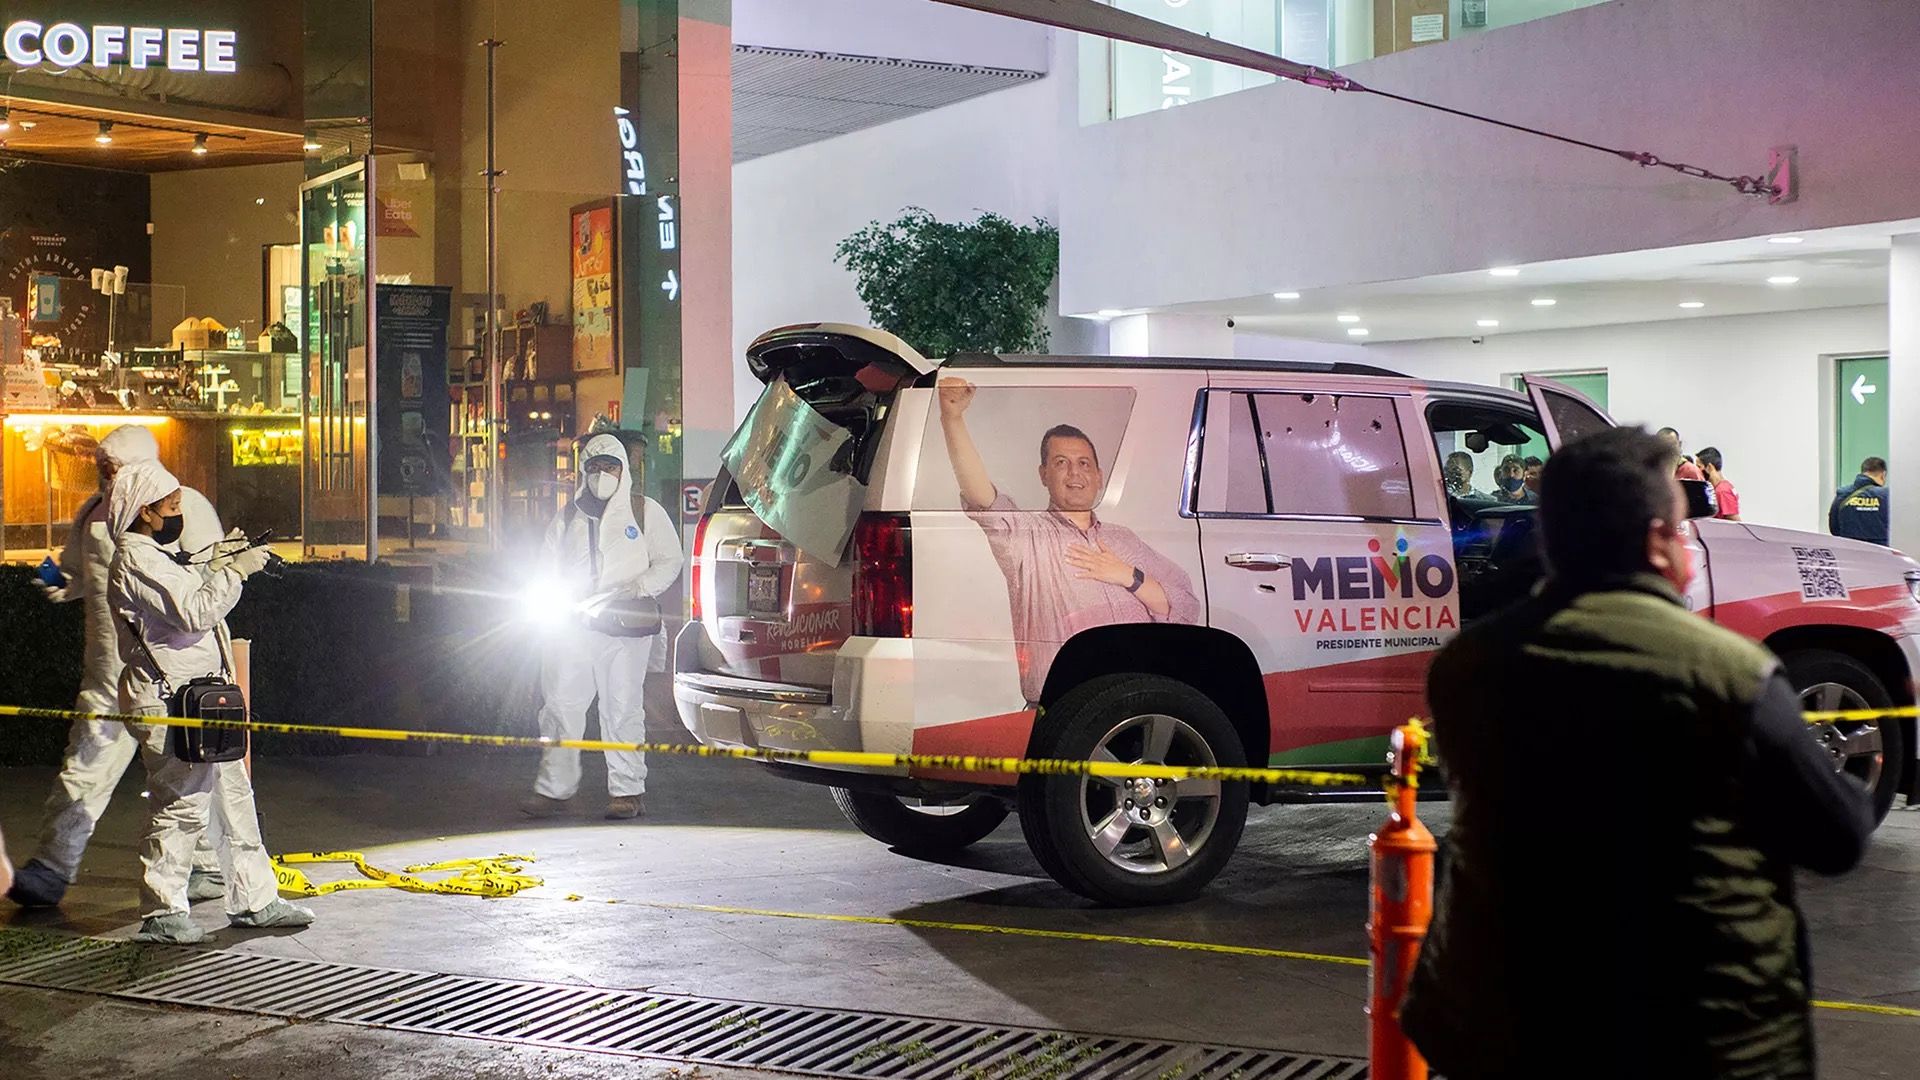 The armored campaign car of Guillermo Valencia, who is running for mayor of Morelia, Michoacán, is seen after being shot up.